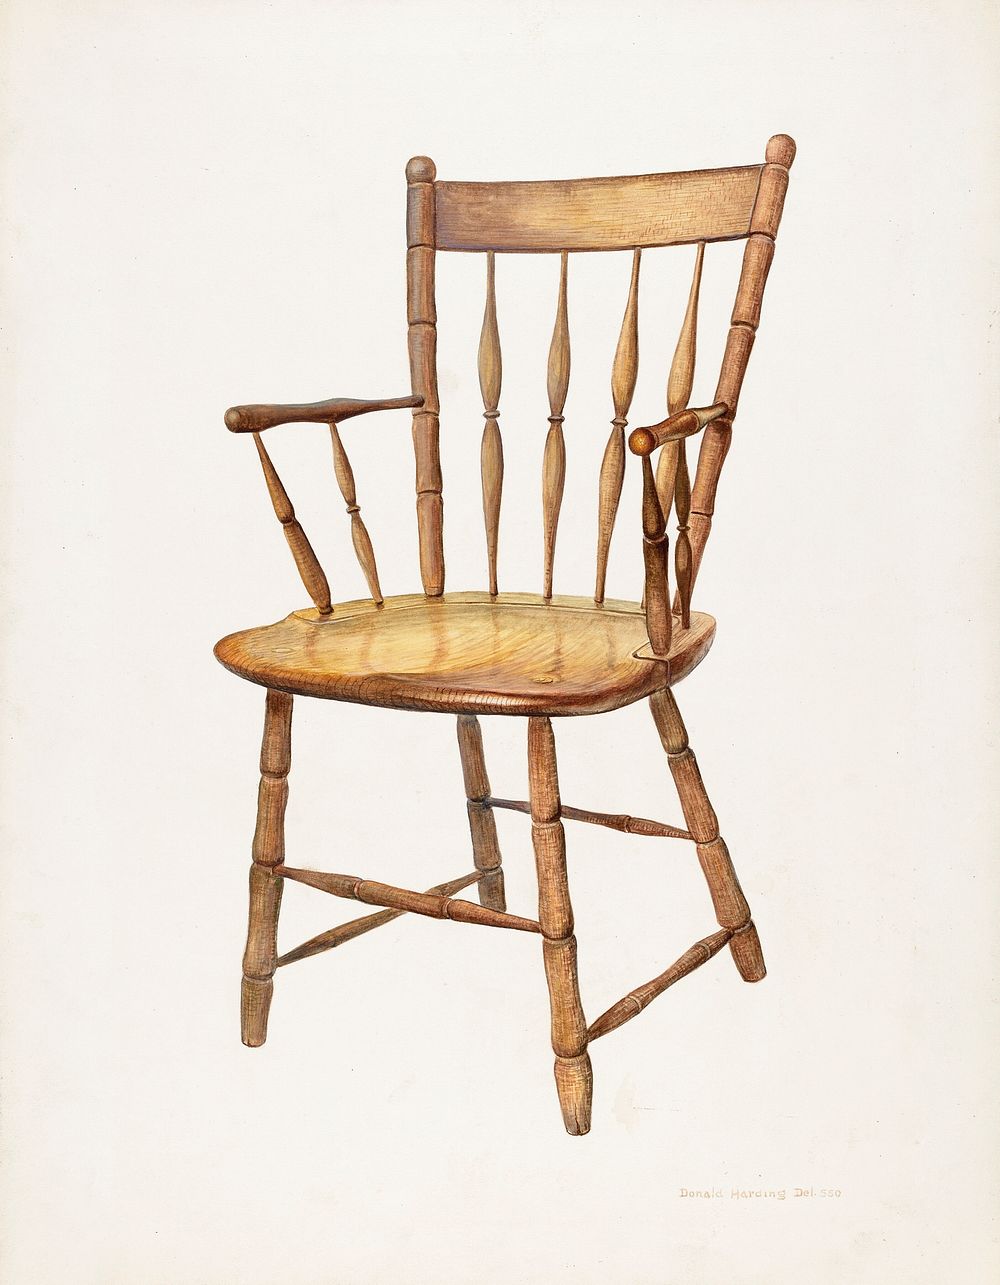 Windsor Armchair (c. 1940) by Donald Harding. Original from The National Gallery of Art. Digitally enhanced by rawpixel.